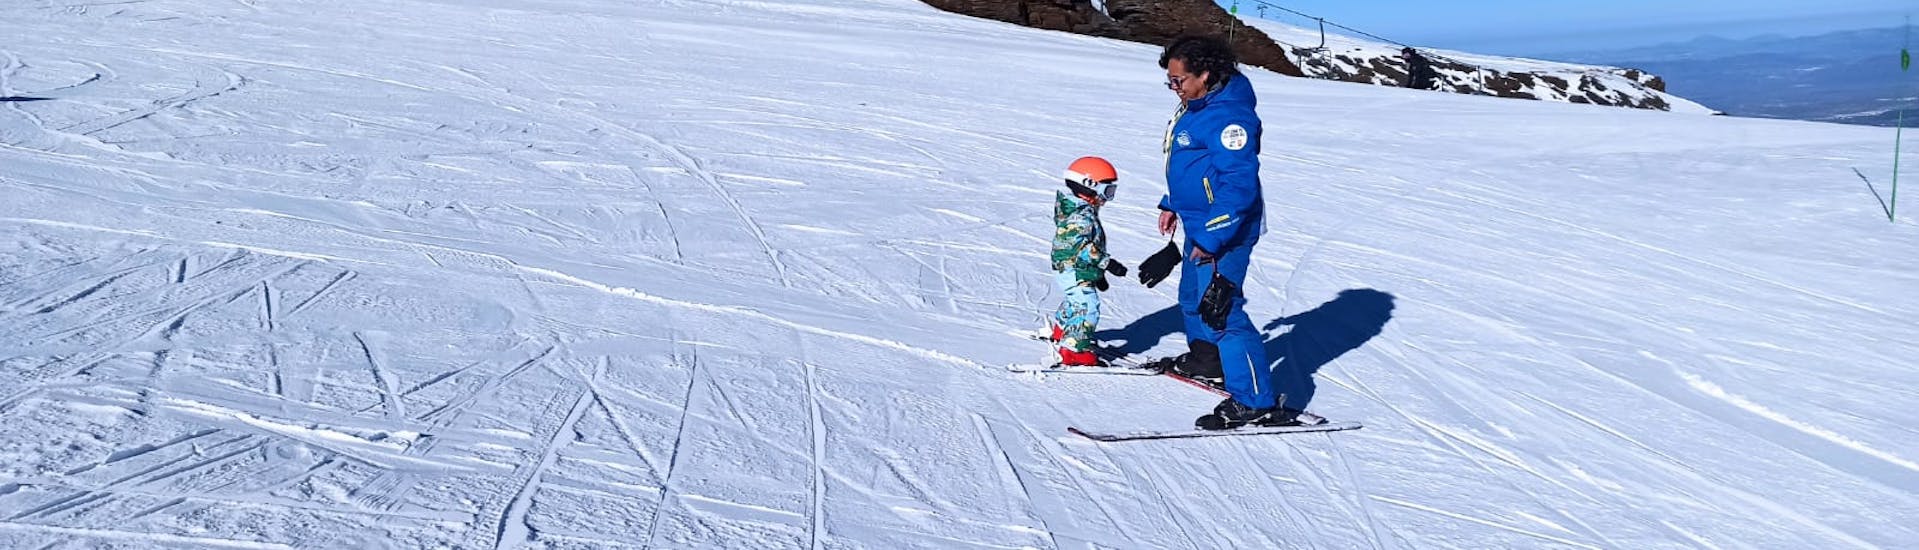 Kids learning how to ski during a ski lesson for all levels with Escuela Universal de Ski Sierra Nevada.